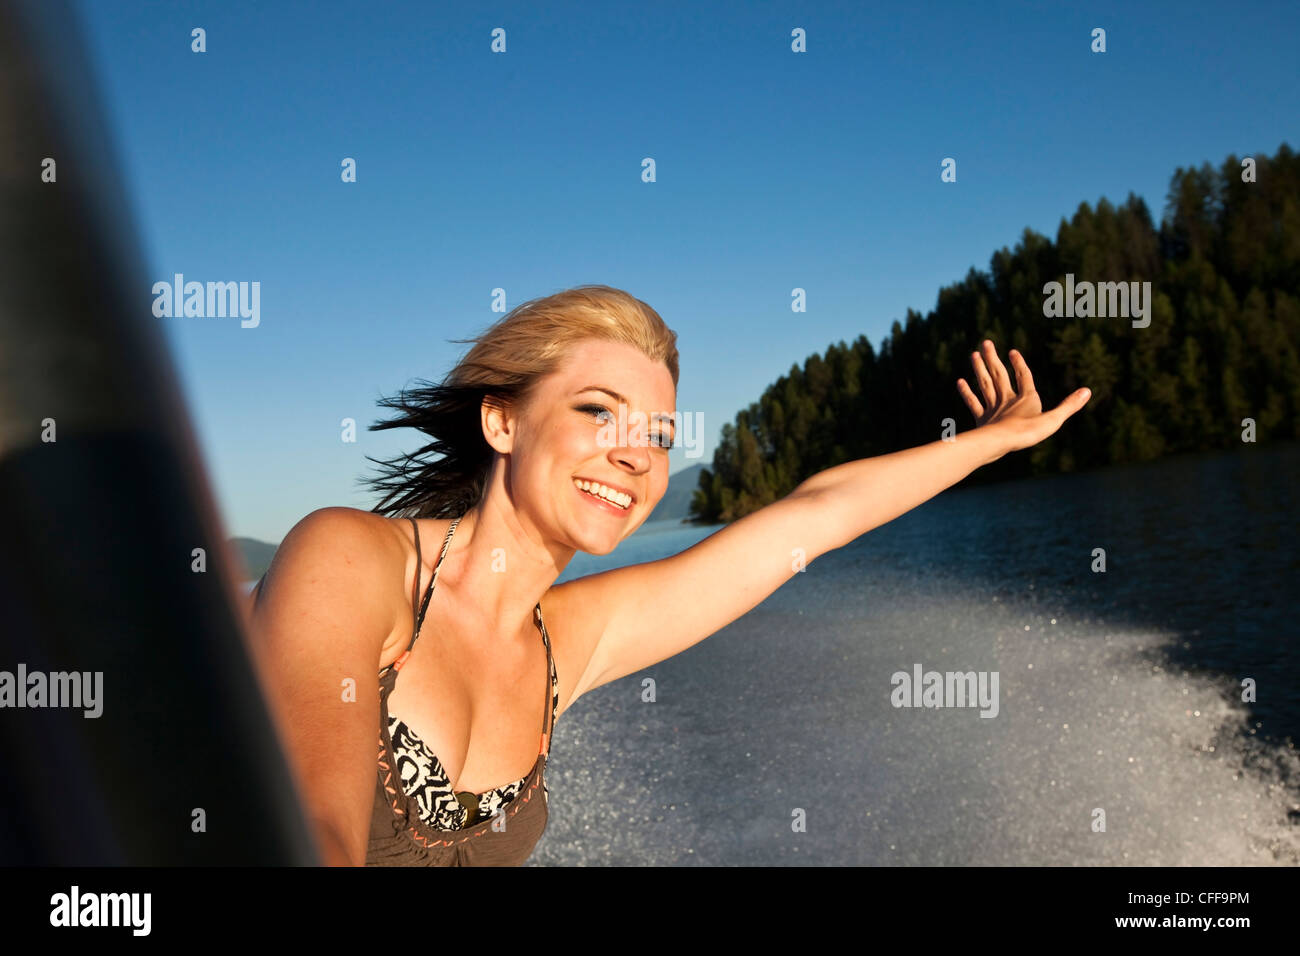 A beautiful young women smiling and holding her hand out at sunset on a wakeboarding boat in Idaho. Stock Photo